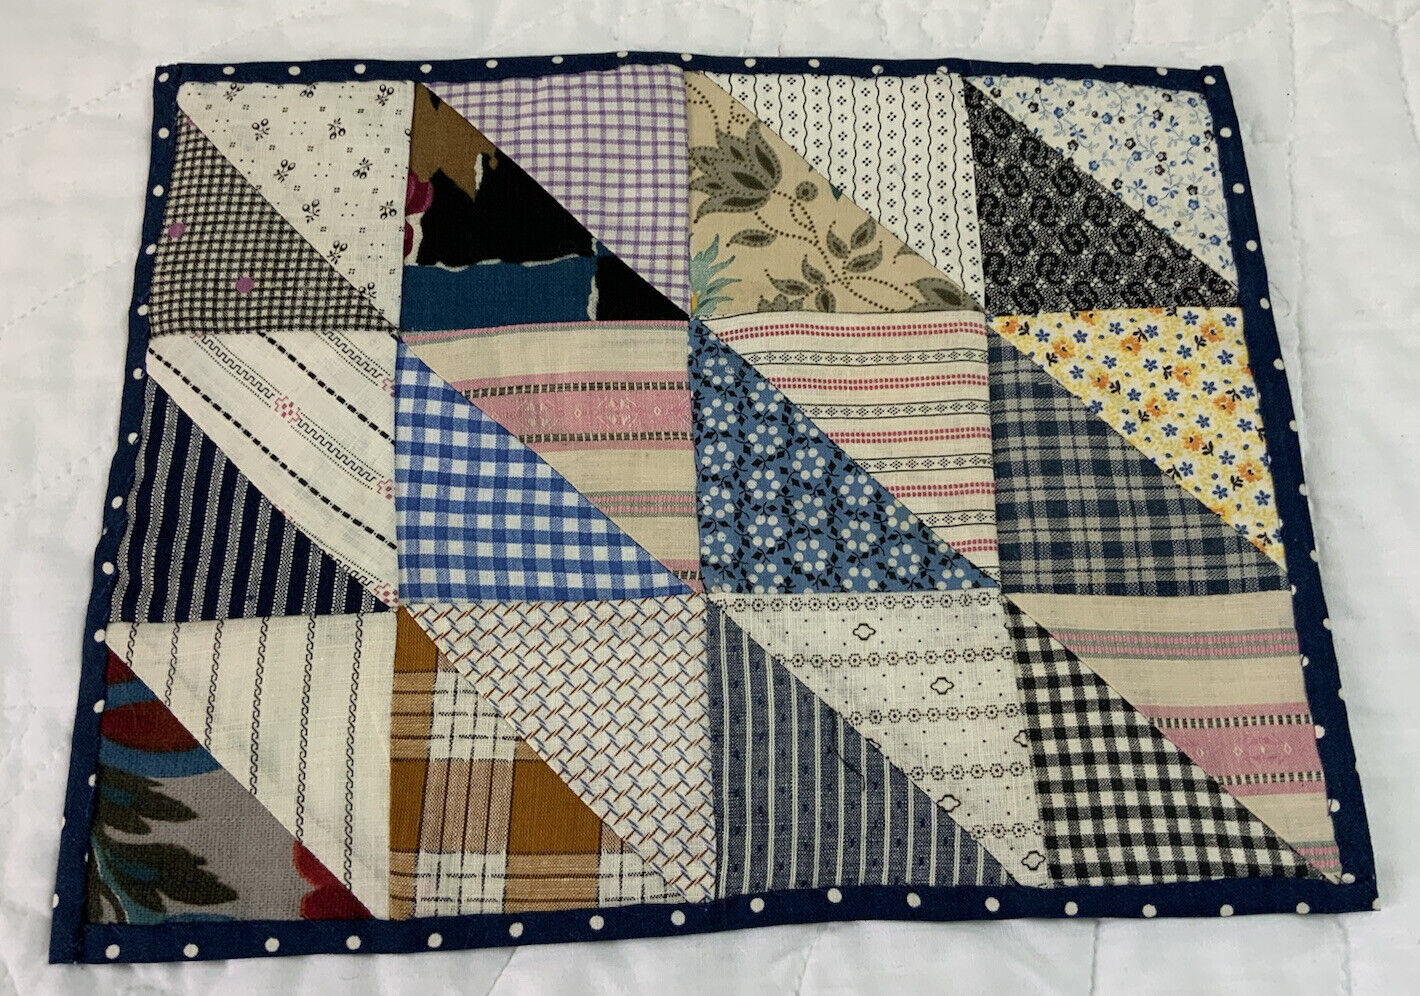 Vintage Patchwork Quilt Table Topper, Triangles, 1930’s, Calico Prints, Multi